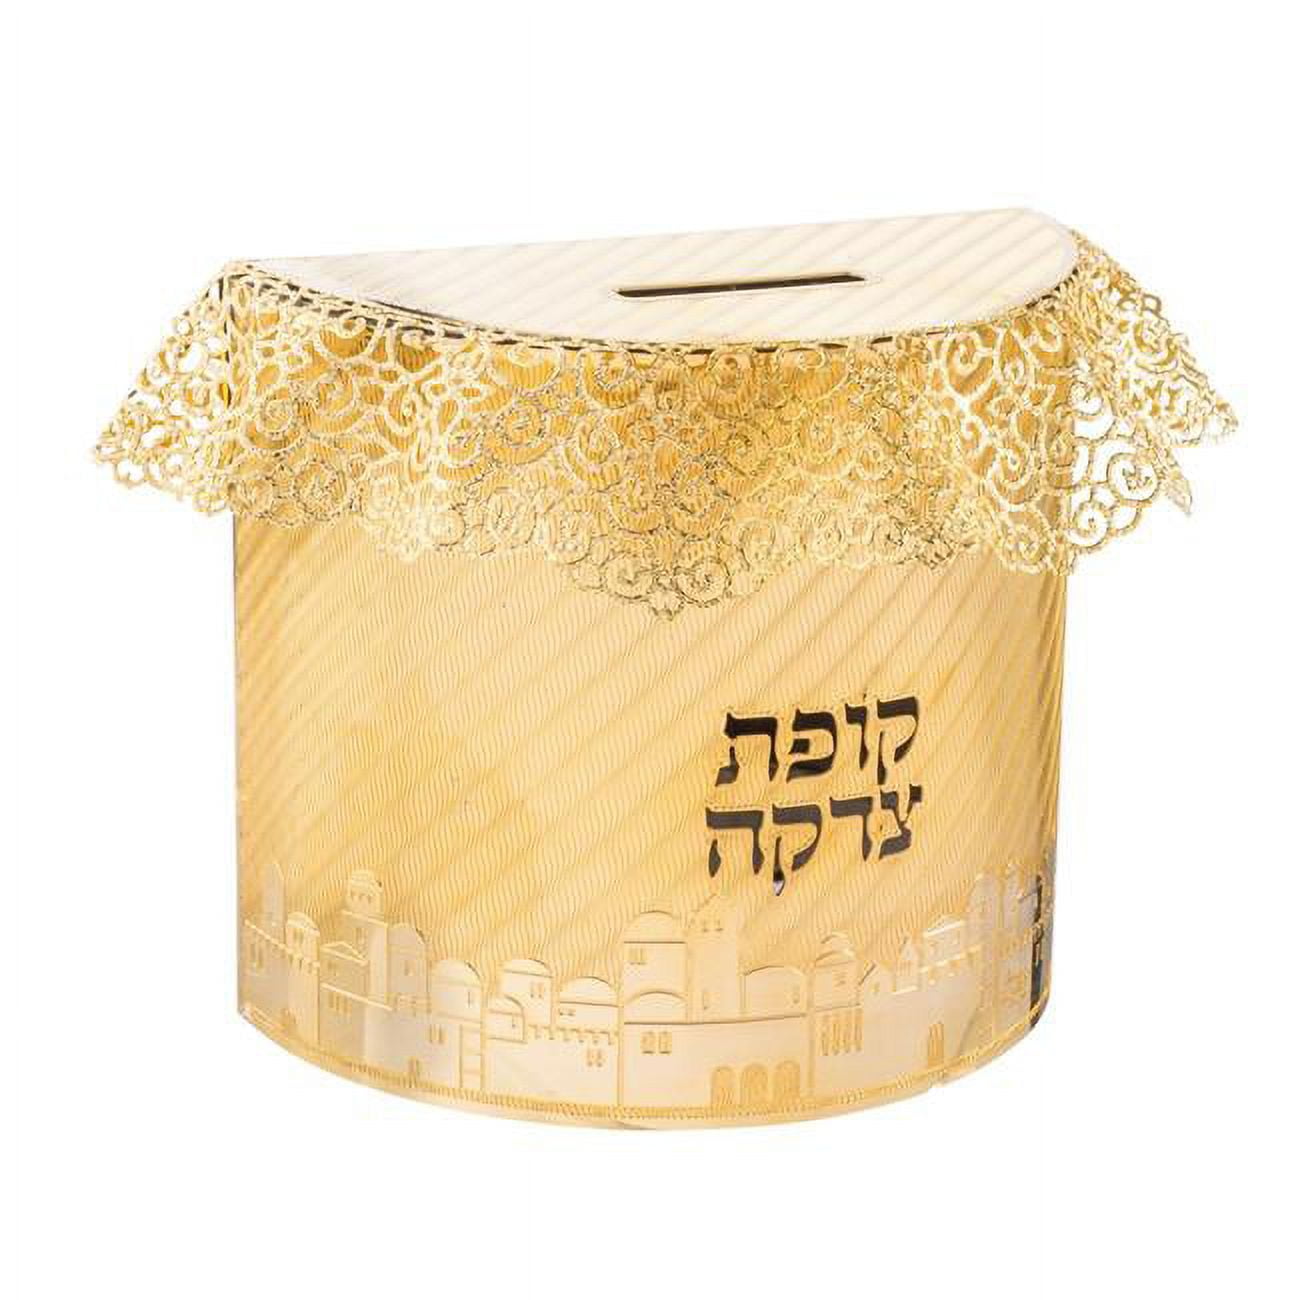 Picture of AM Judaica 49795 4 x 4 x 2 in., 0.12 x 1.62 in. Round Shape 24K Gold Plated Tzedakah Box